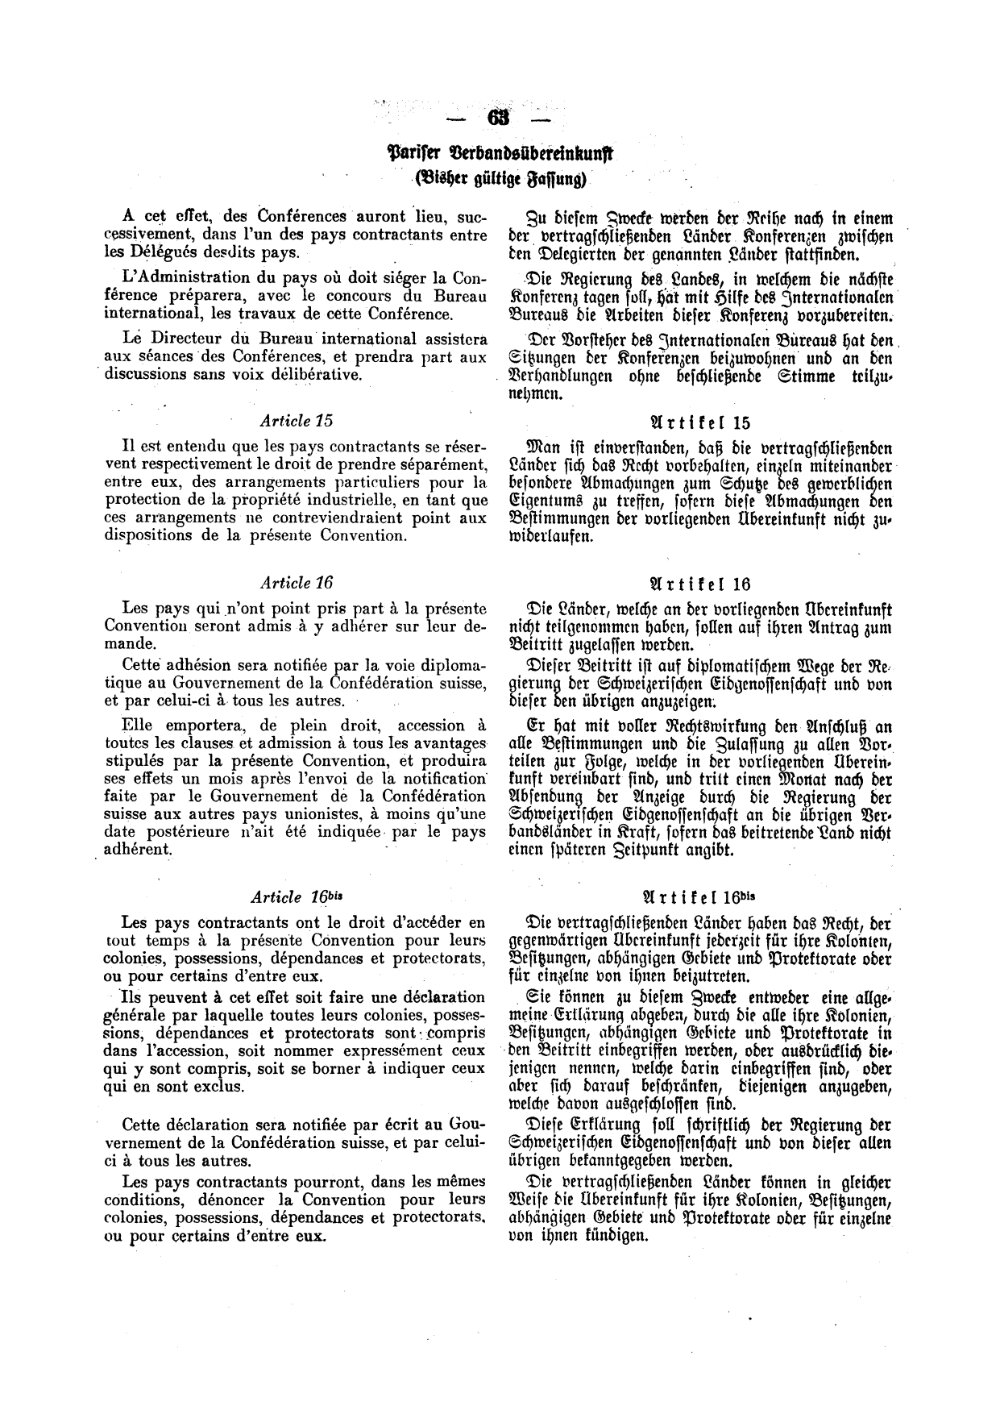 Scan of page 63